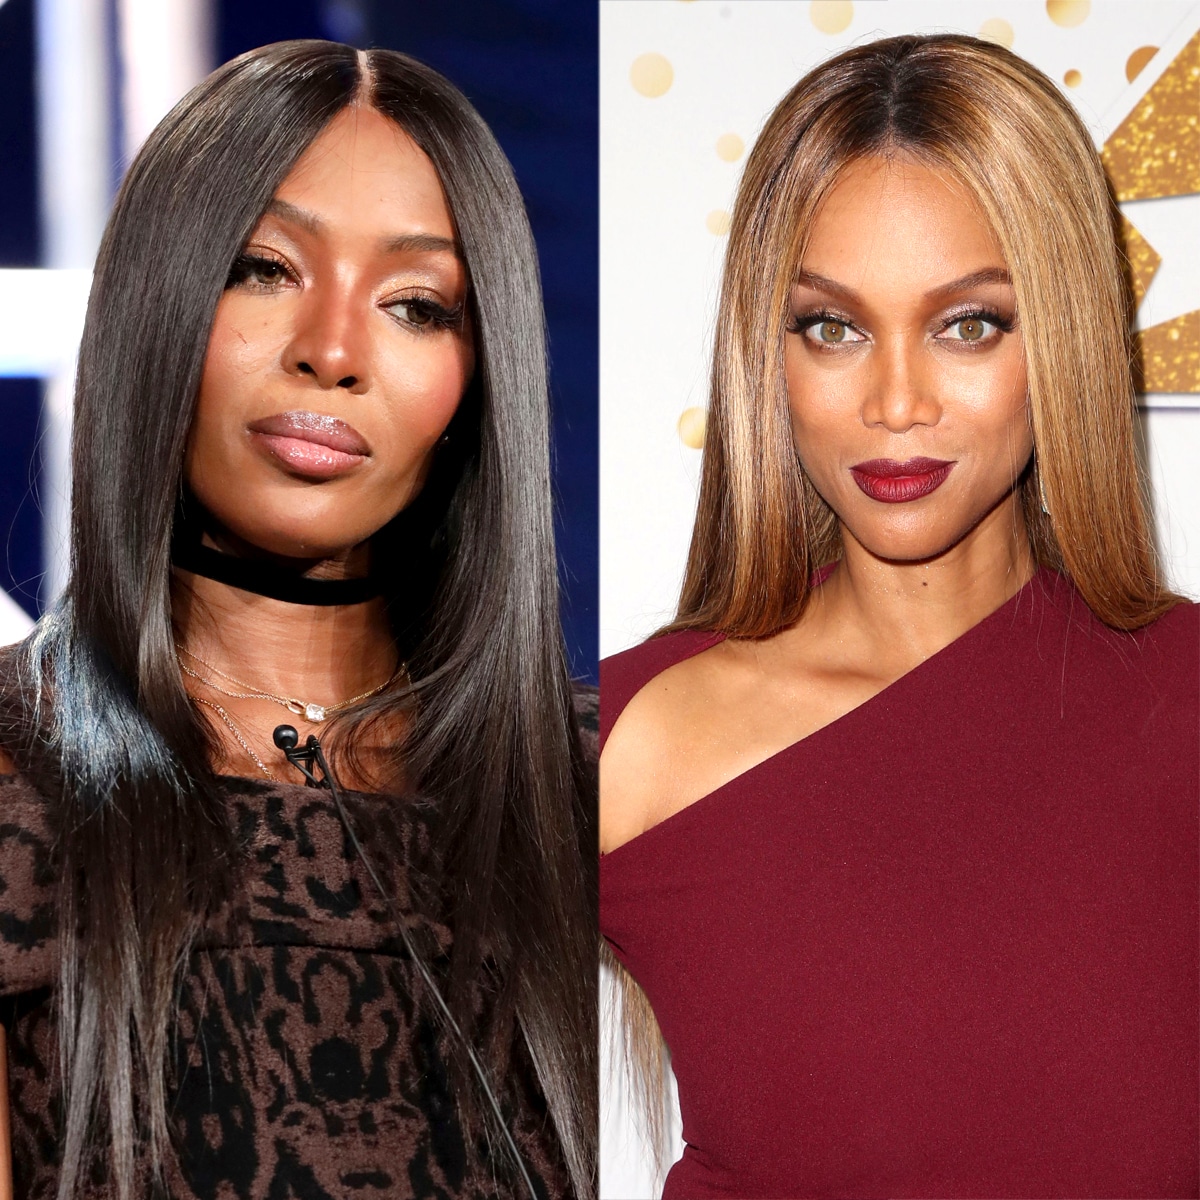 Naomi Campbell's Latest Post Hints Tyra Banks Is 